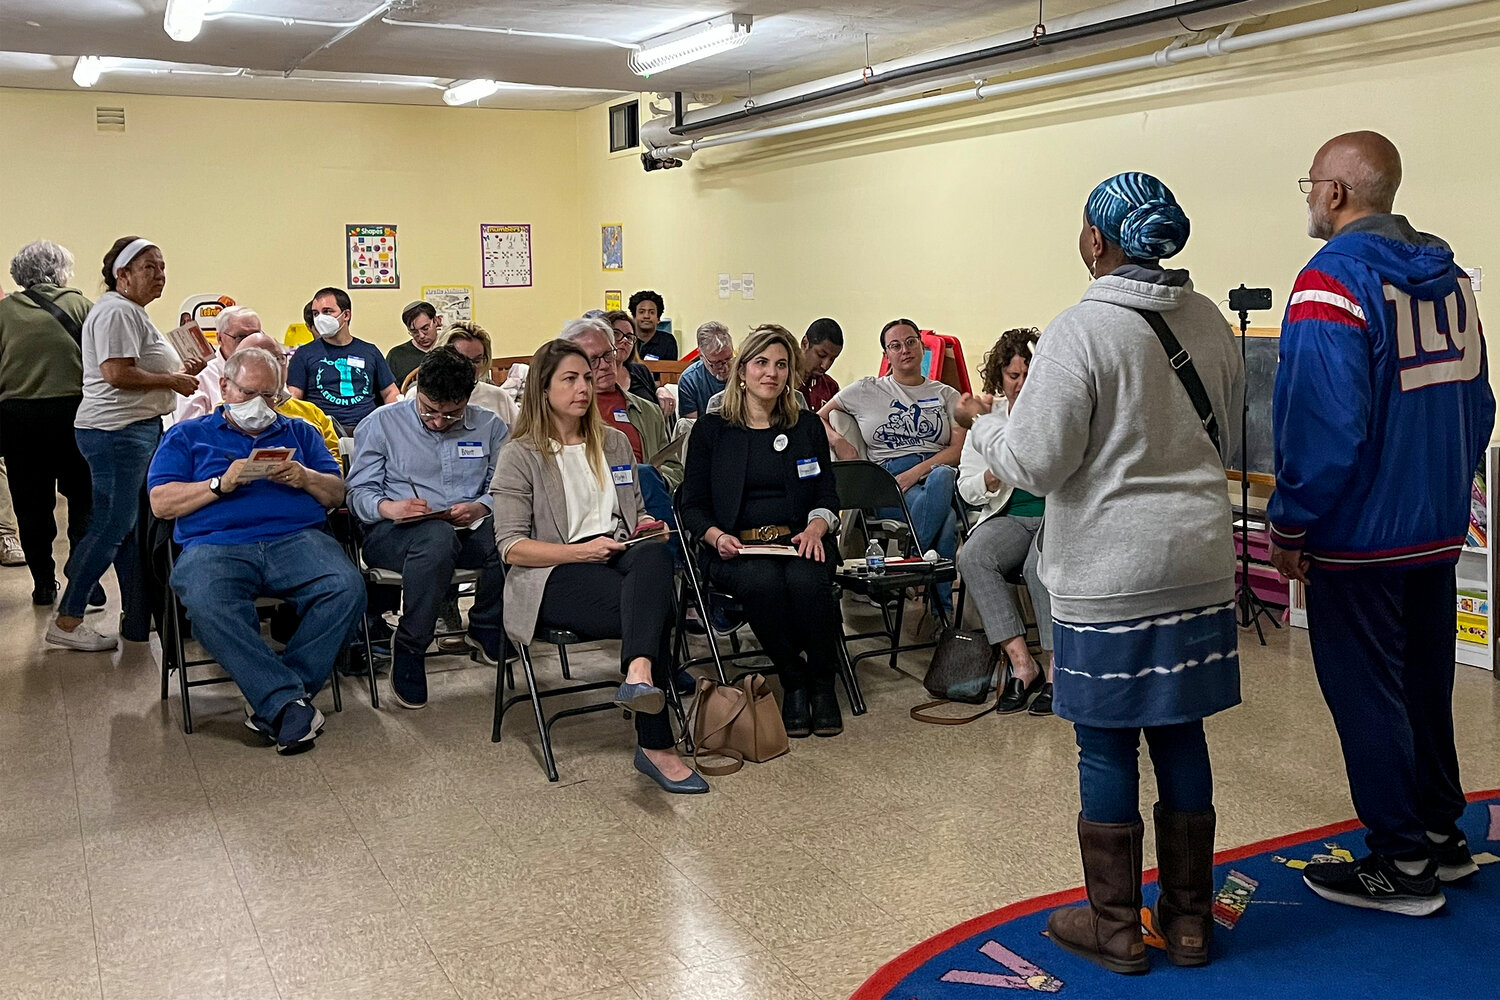 At the Unity Democratic Club meeting on May 18, speakers from the Releasing Aging People in Prison campaign spoke about the elder parole and fair and timely parole bills.